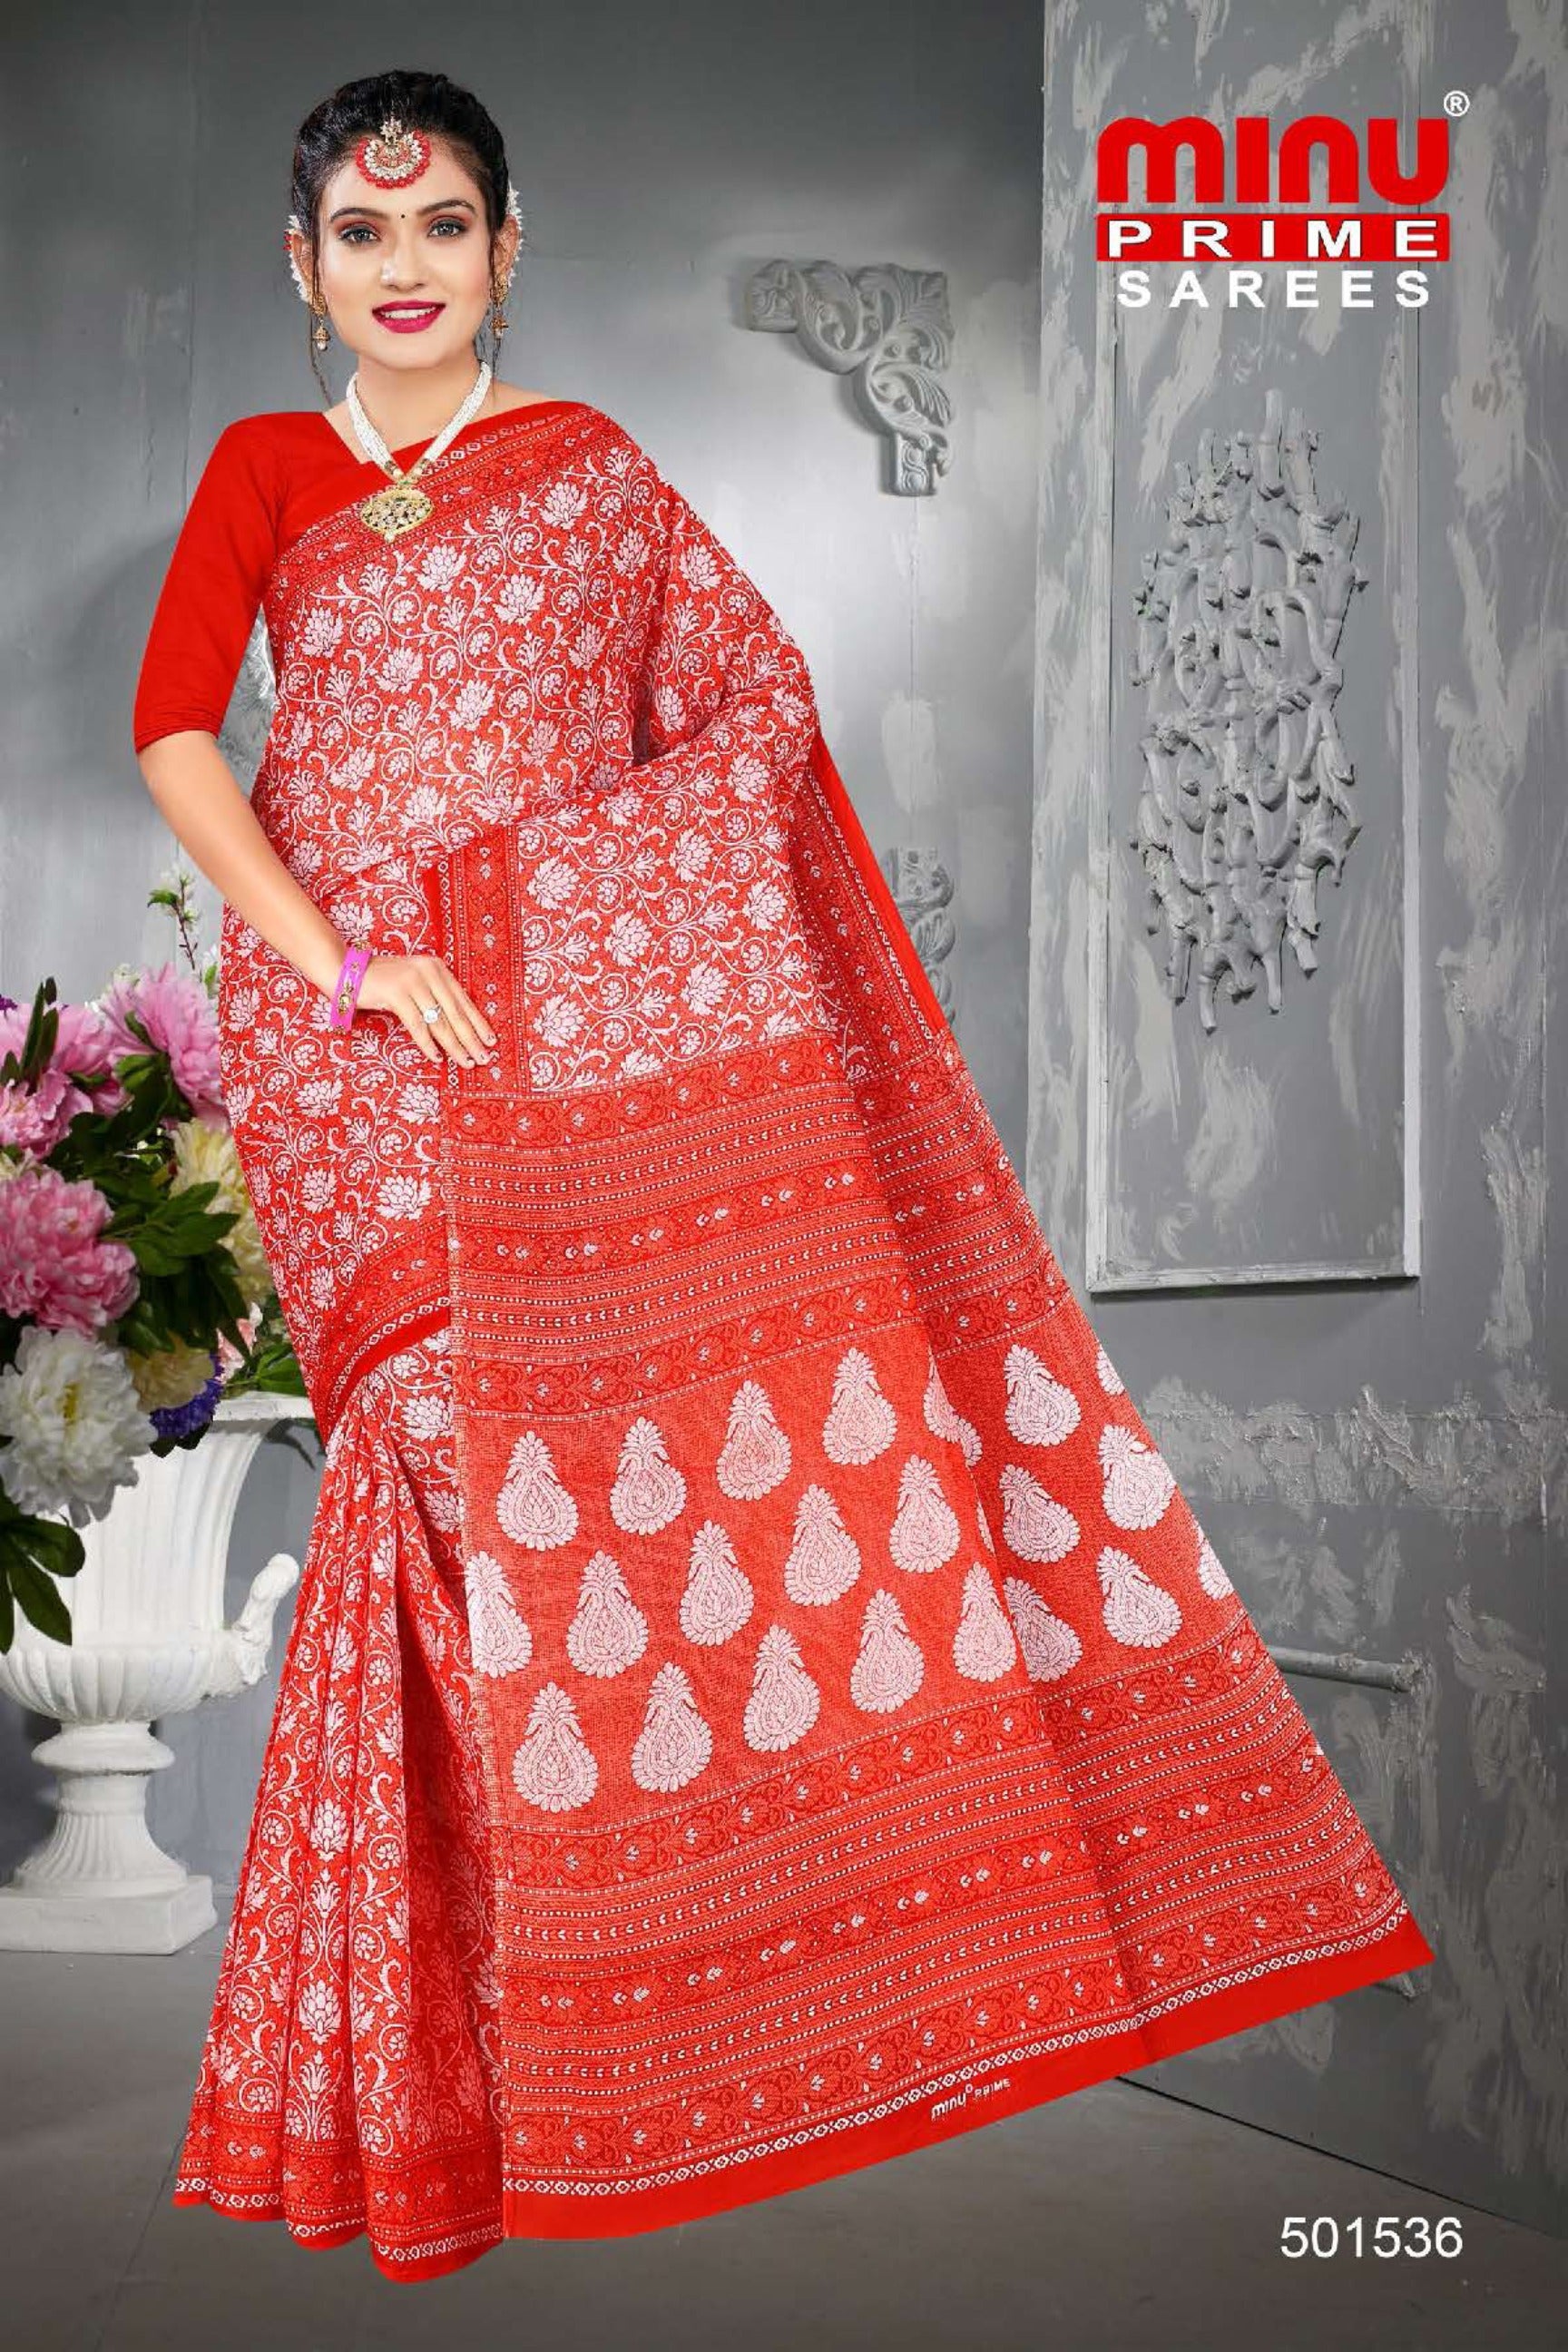 Red printed saree wearing woman looking bold and classy 